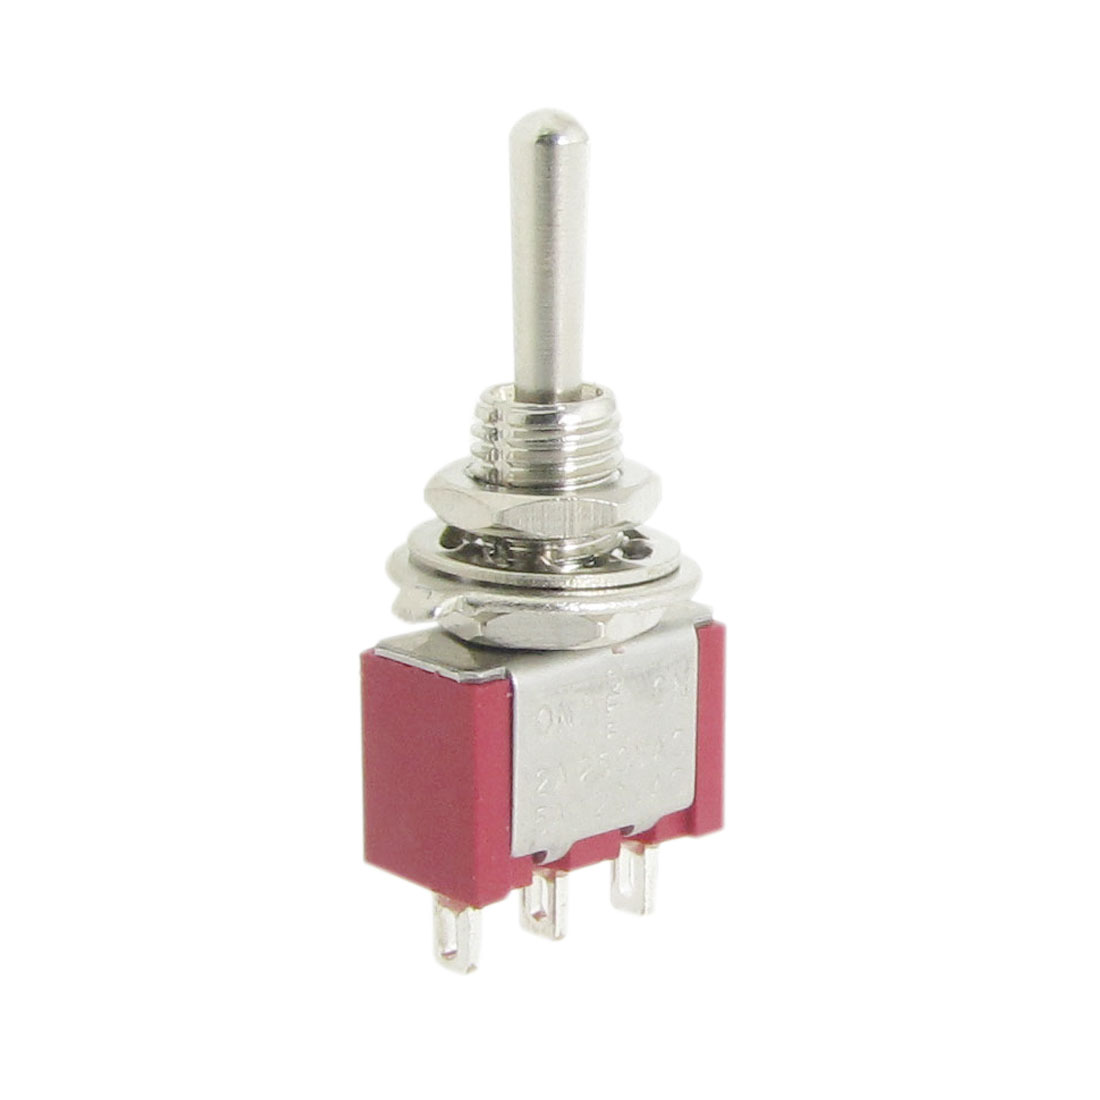 Unique Bargains 4 Pcs AC 250V 2A 120V 5A on-off-on SPDT 3 Pins Miniature Momentary Toggle Switch